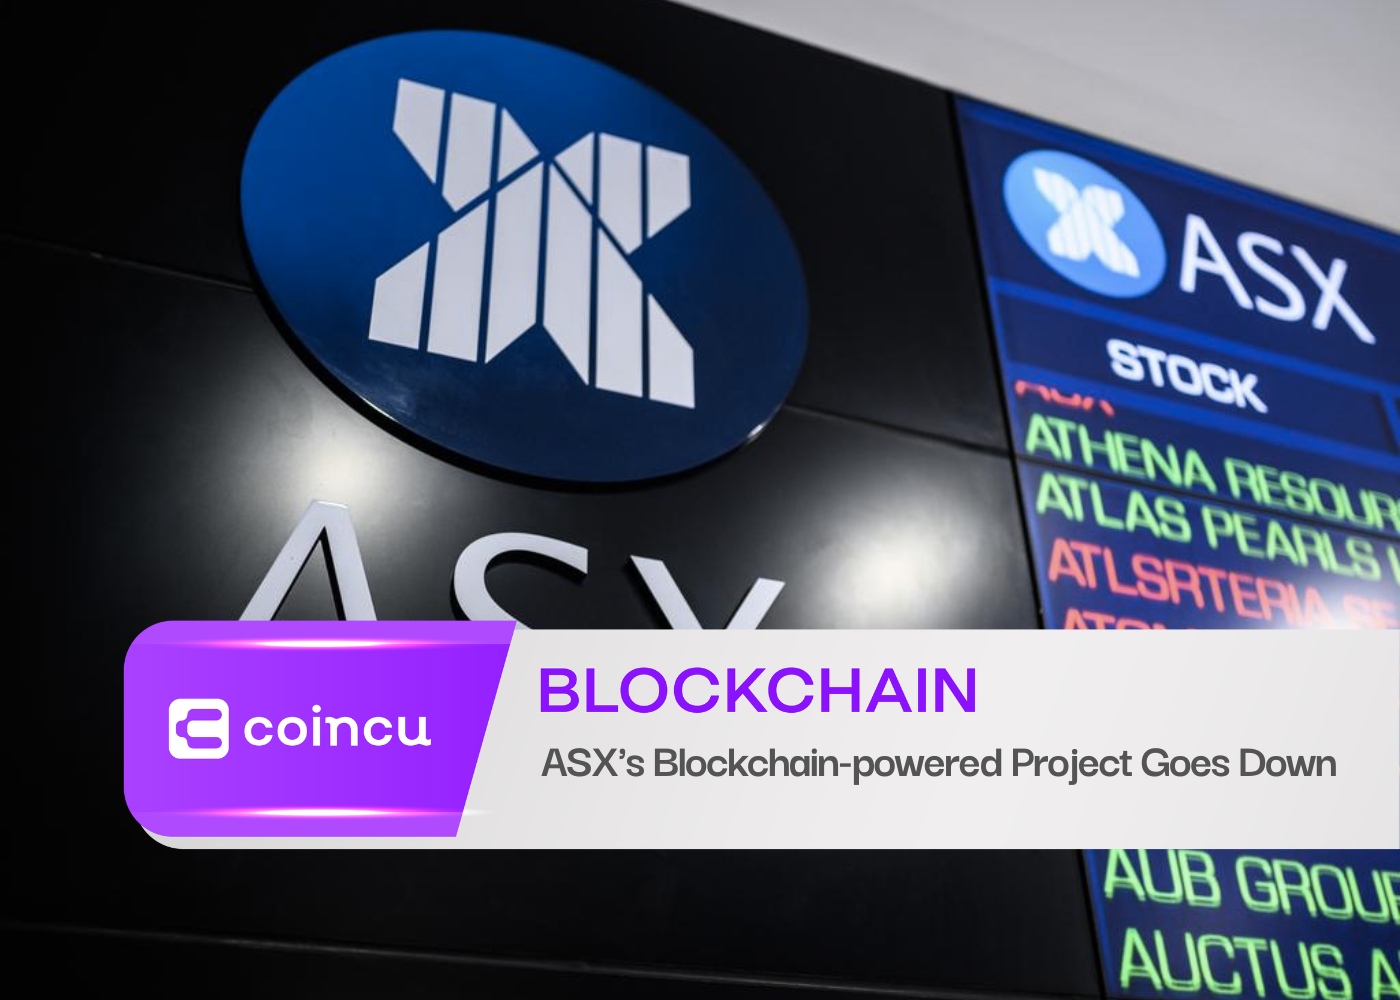 ASX's Blockchain-powered Project Goes Down